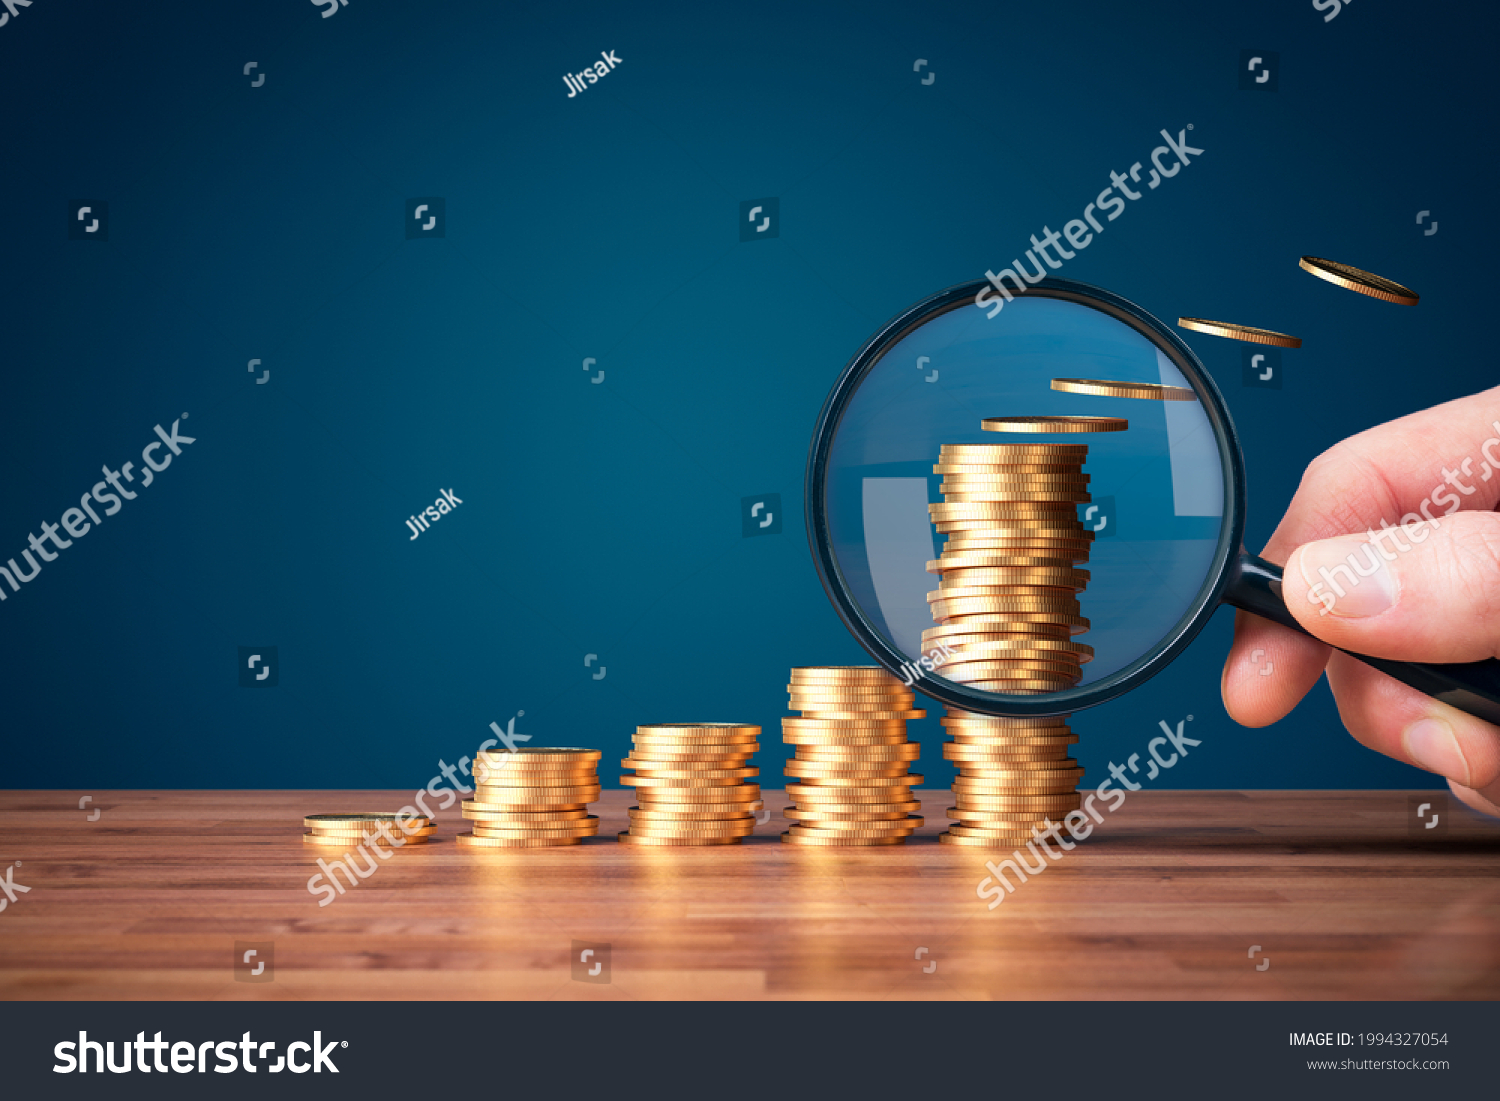 Inflation, tax, cash flow and another financial concept. Financial advisor focused on decreasing value of money in post-covid era. Hand with magnifying glass focused on coins fly away. #1994327054